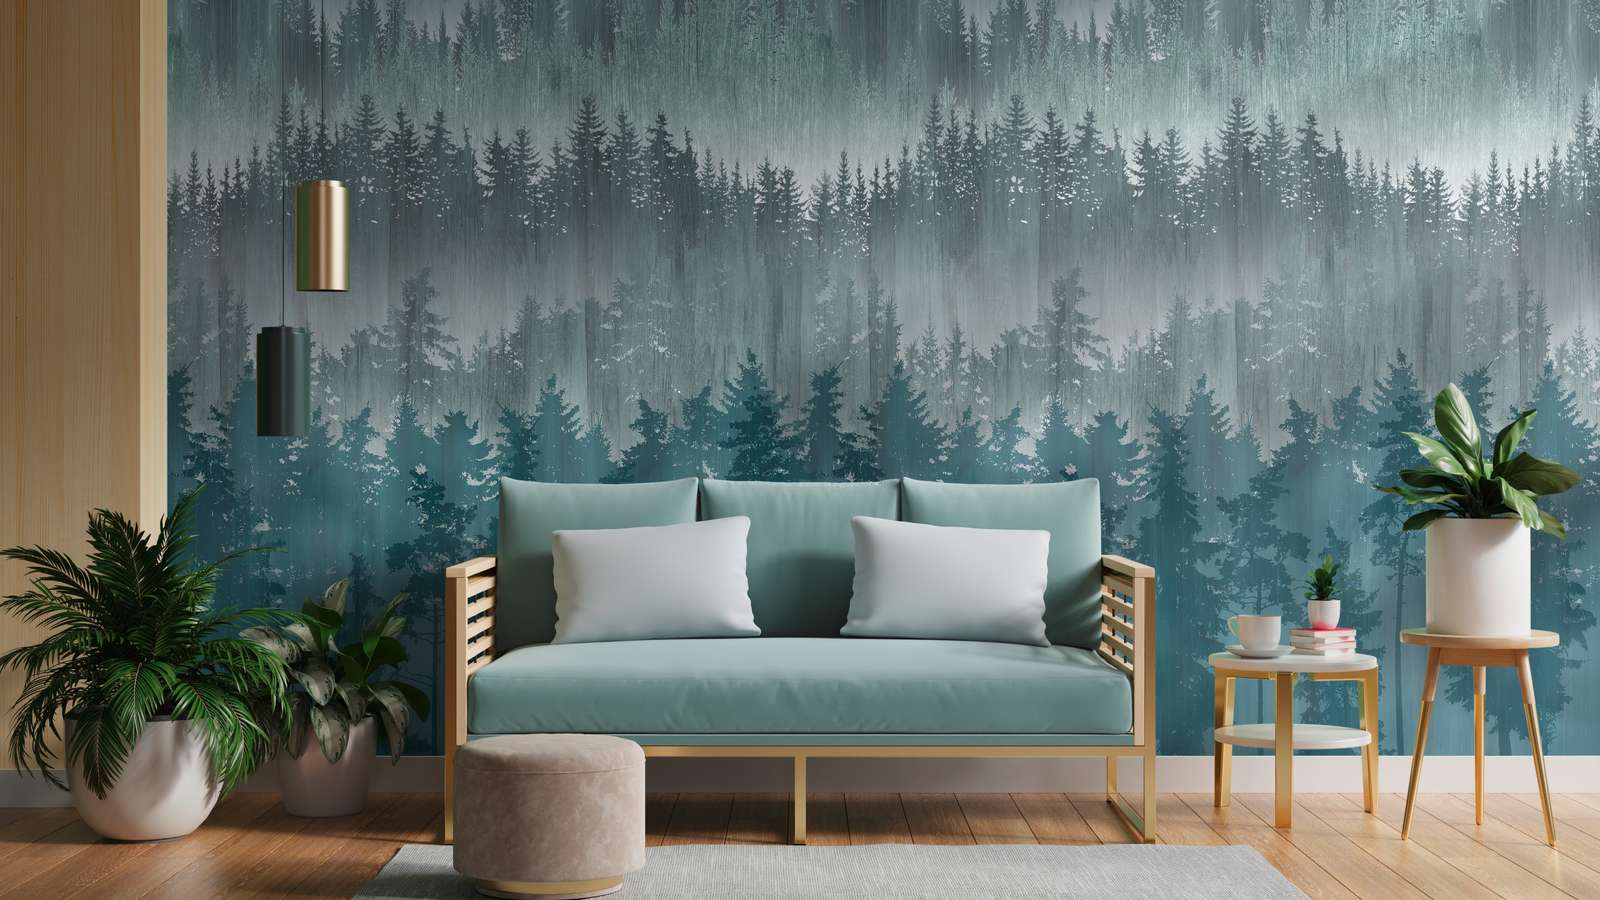             Non-woven wallpaper with abstract forest pattern - blue, grey, petrol
        